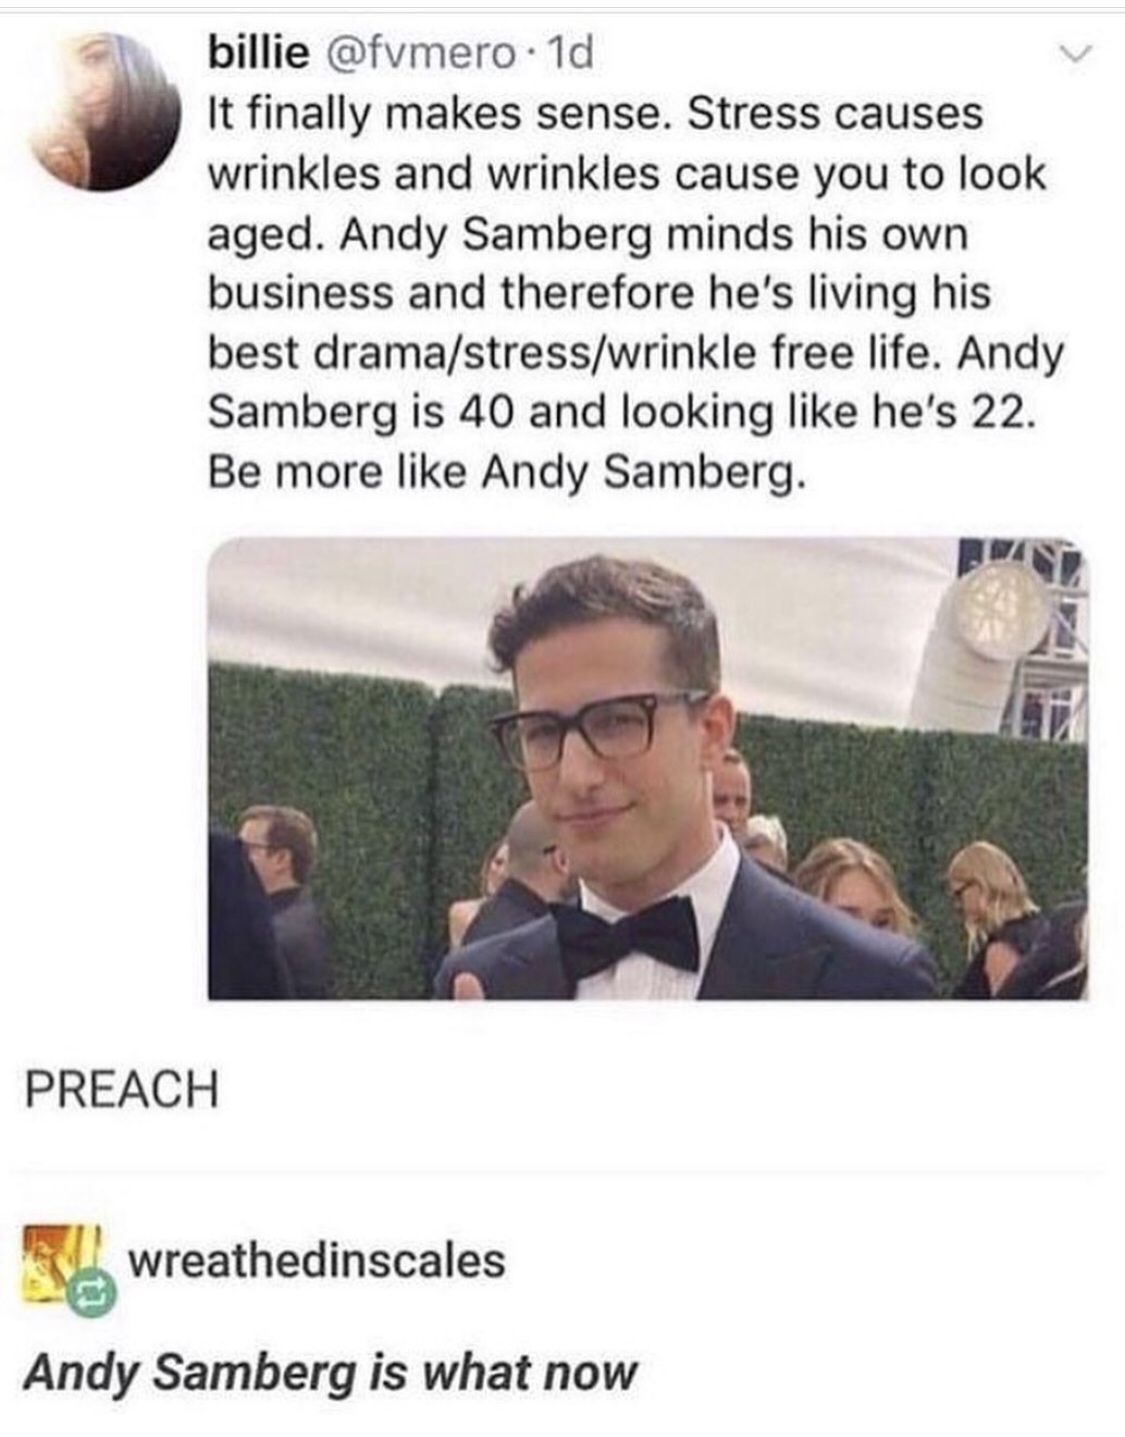 andy samberg age meme - billie . 1d It finally makes sense. Stress causes wrinkles and wrinkles cause you to look aged. Andy Samberg minds his own business and therefore he's living his best dramastresswrinkle free life. Andy Samberg is 40 and looking he'